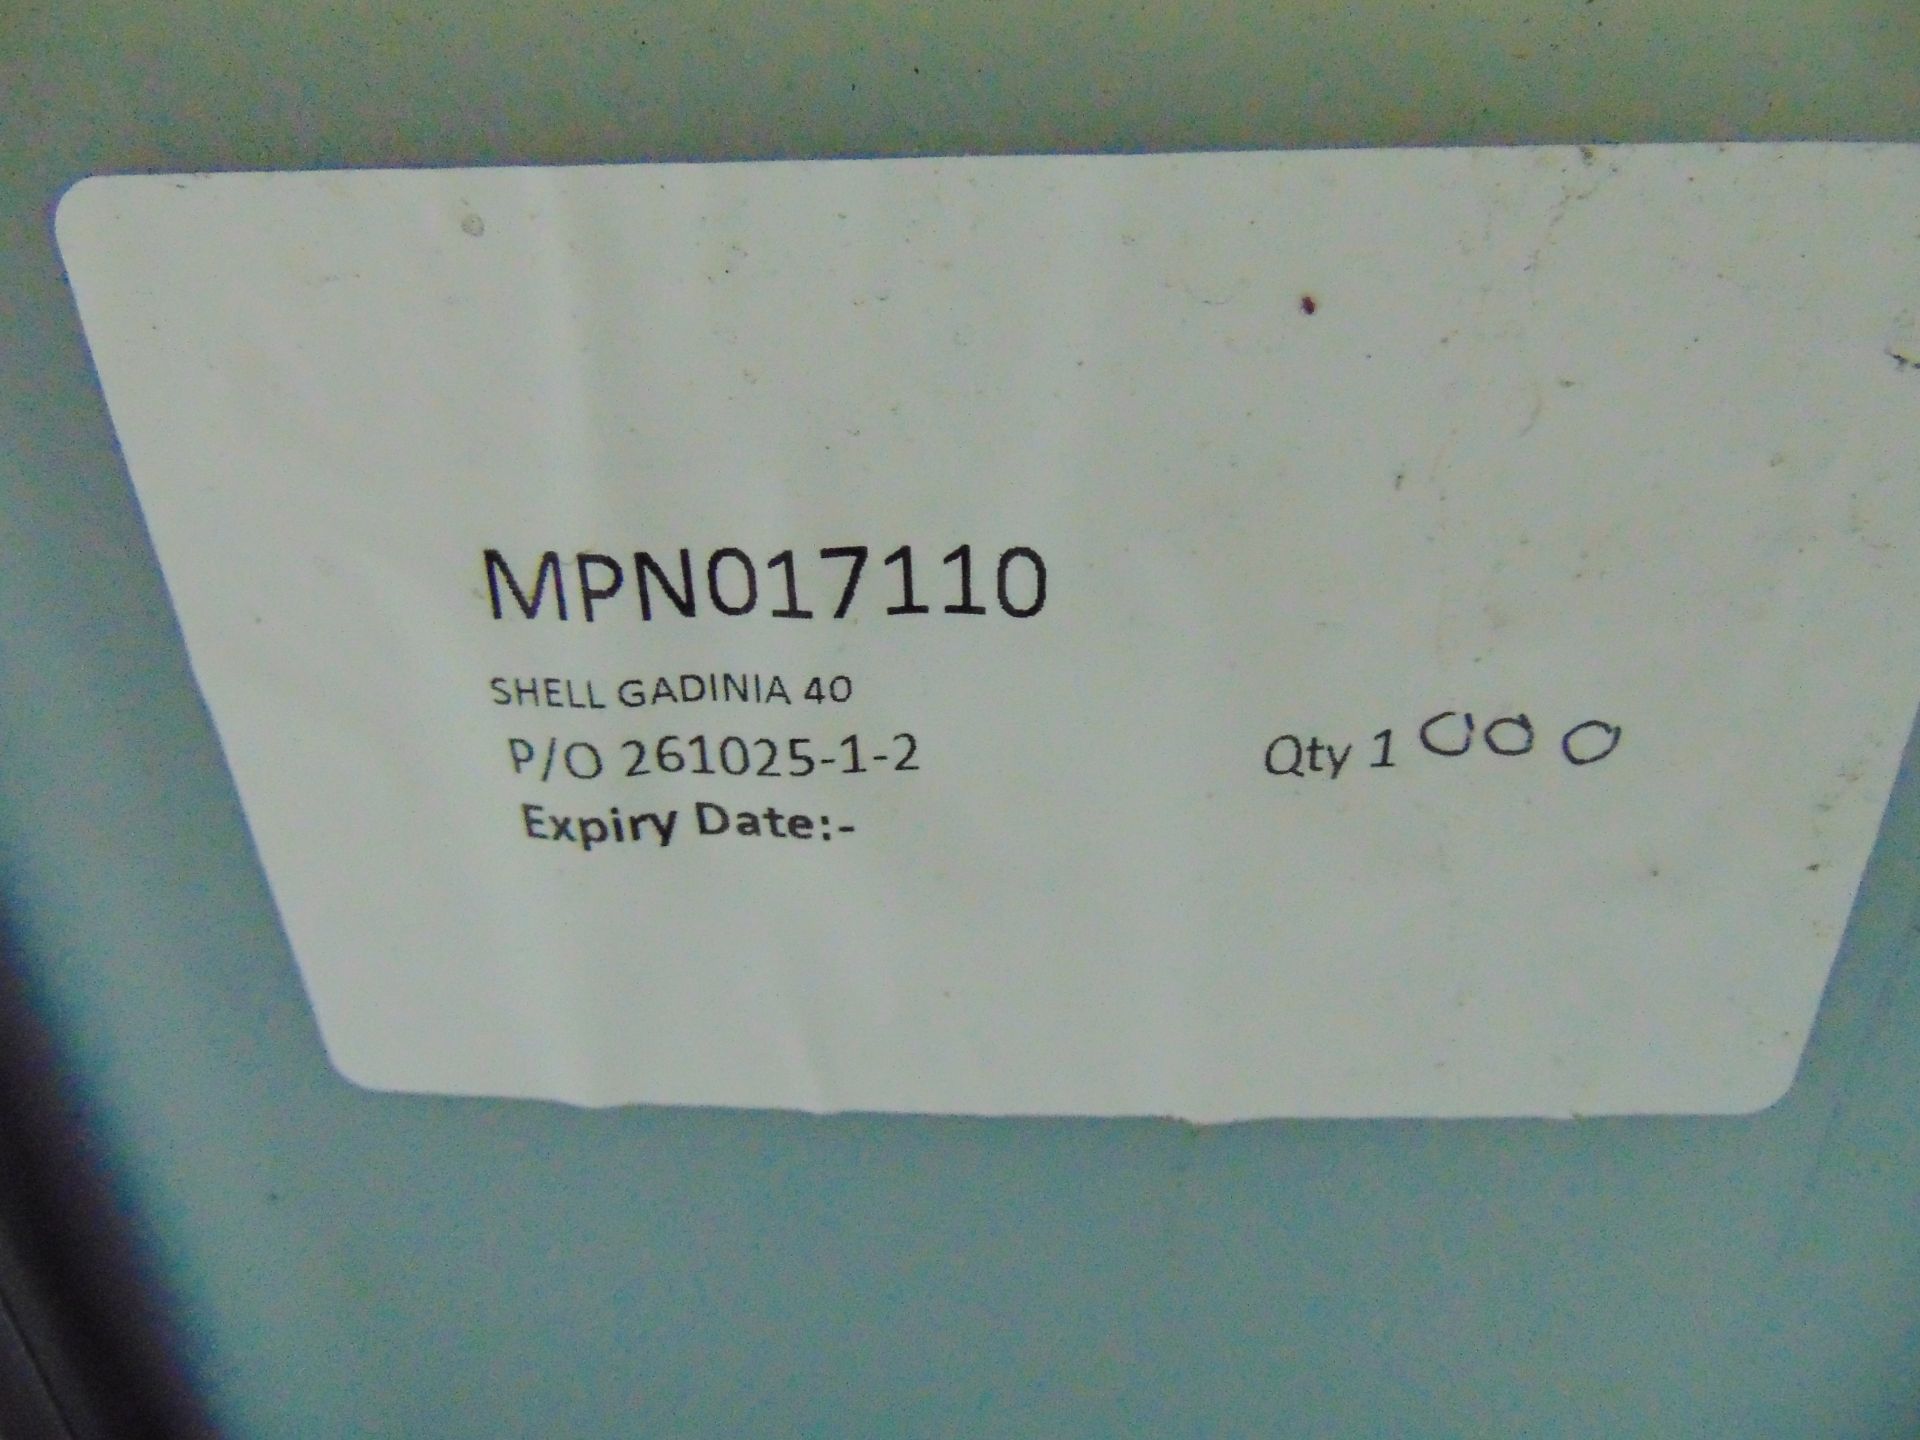 1 x Unissued 1000L IBC of Shell Gardinia 40 Oil - Image 5 of 7